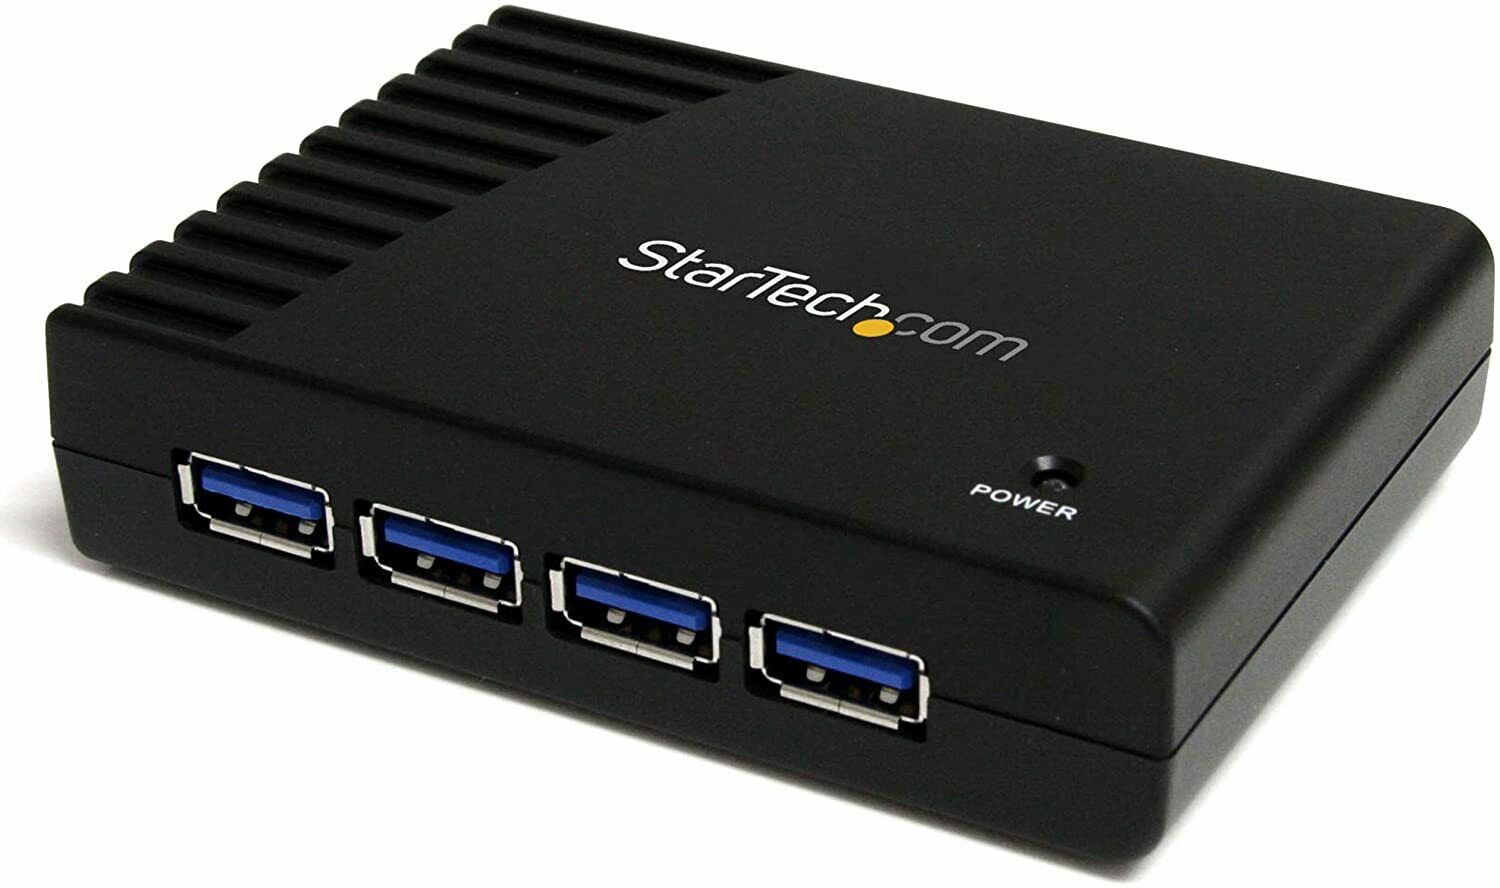 Startech.com 4-port Usb 3.0 Superspeed Hub With Power Adapter - Portable Multipo